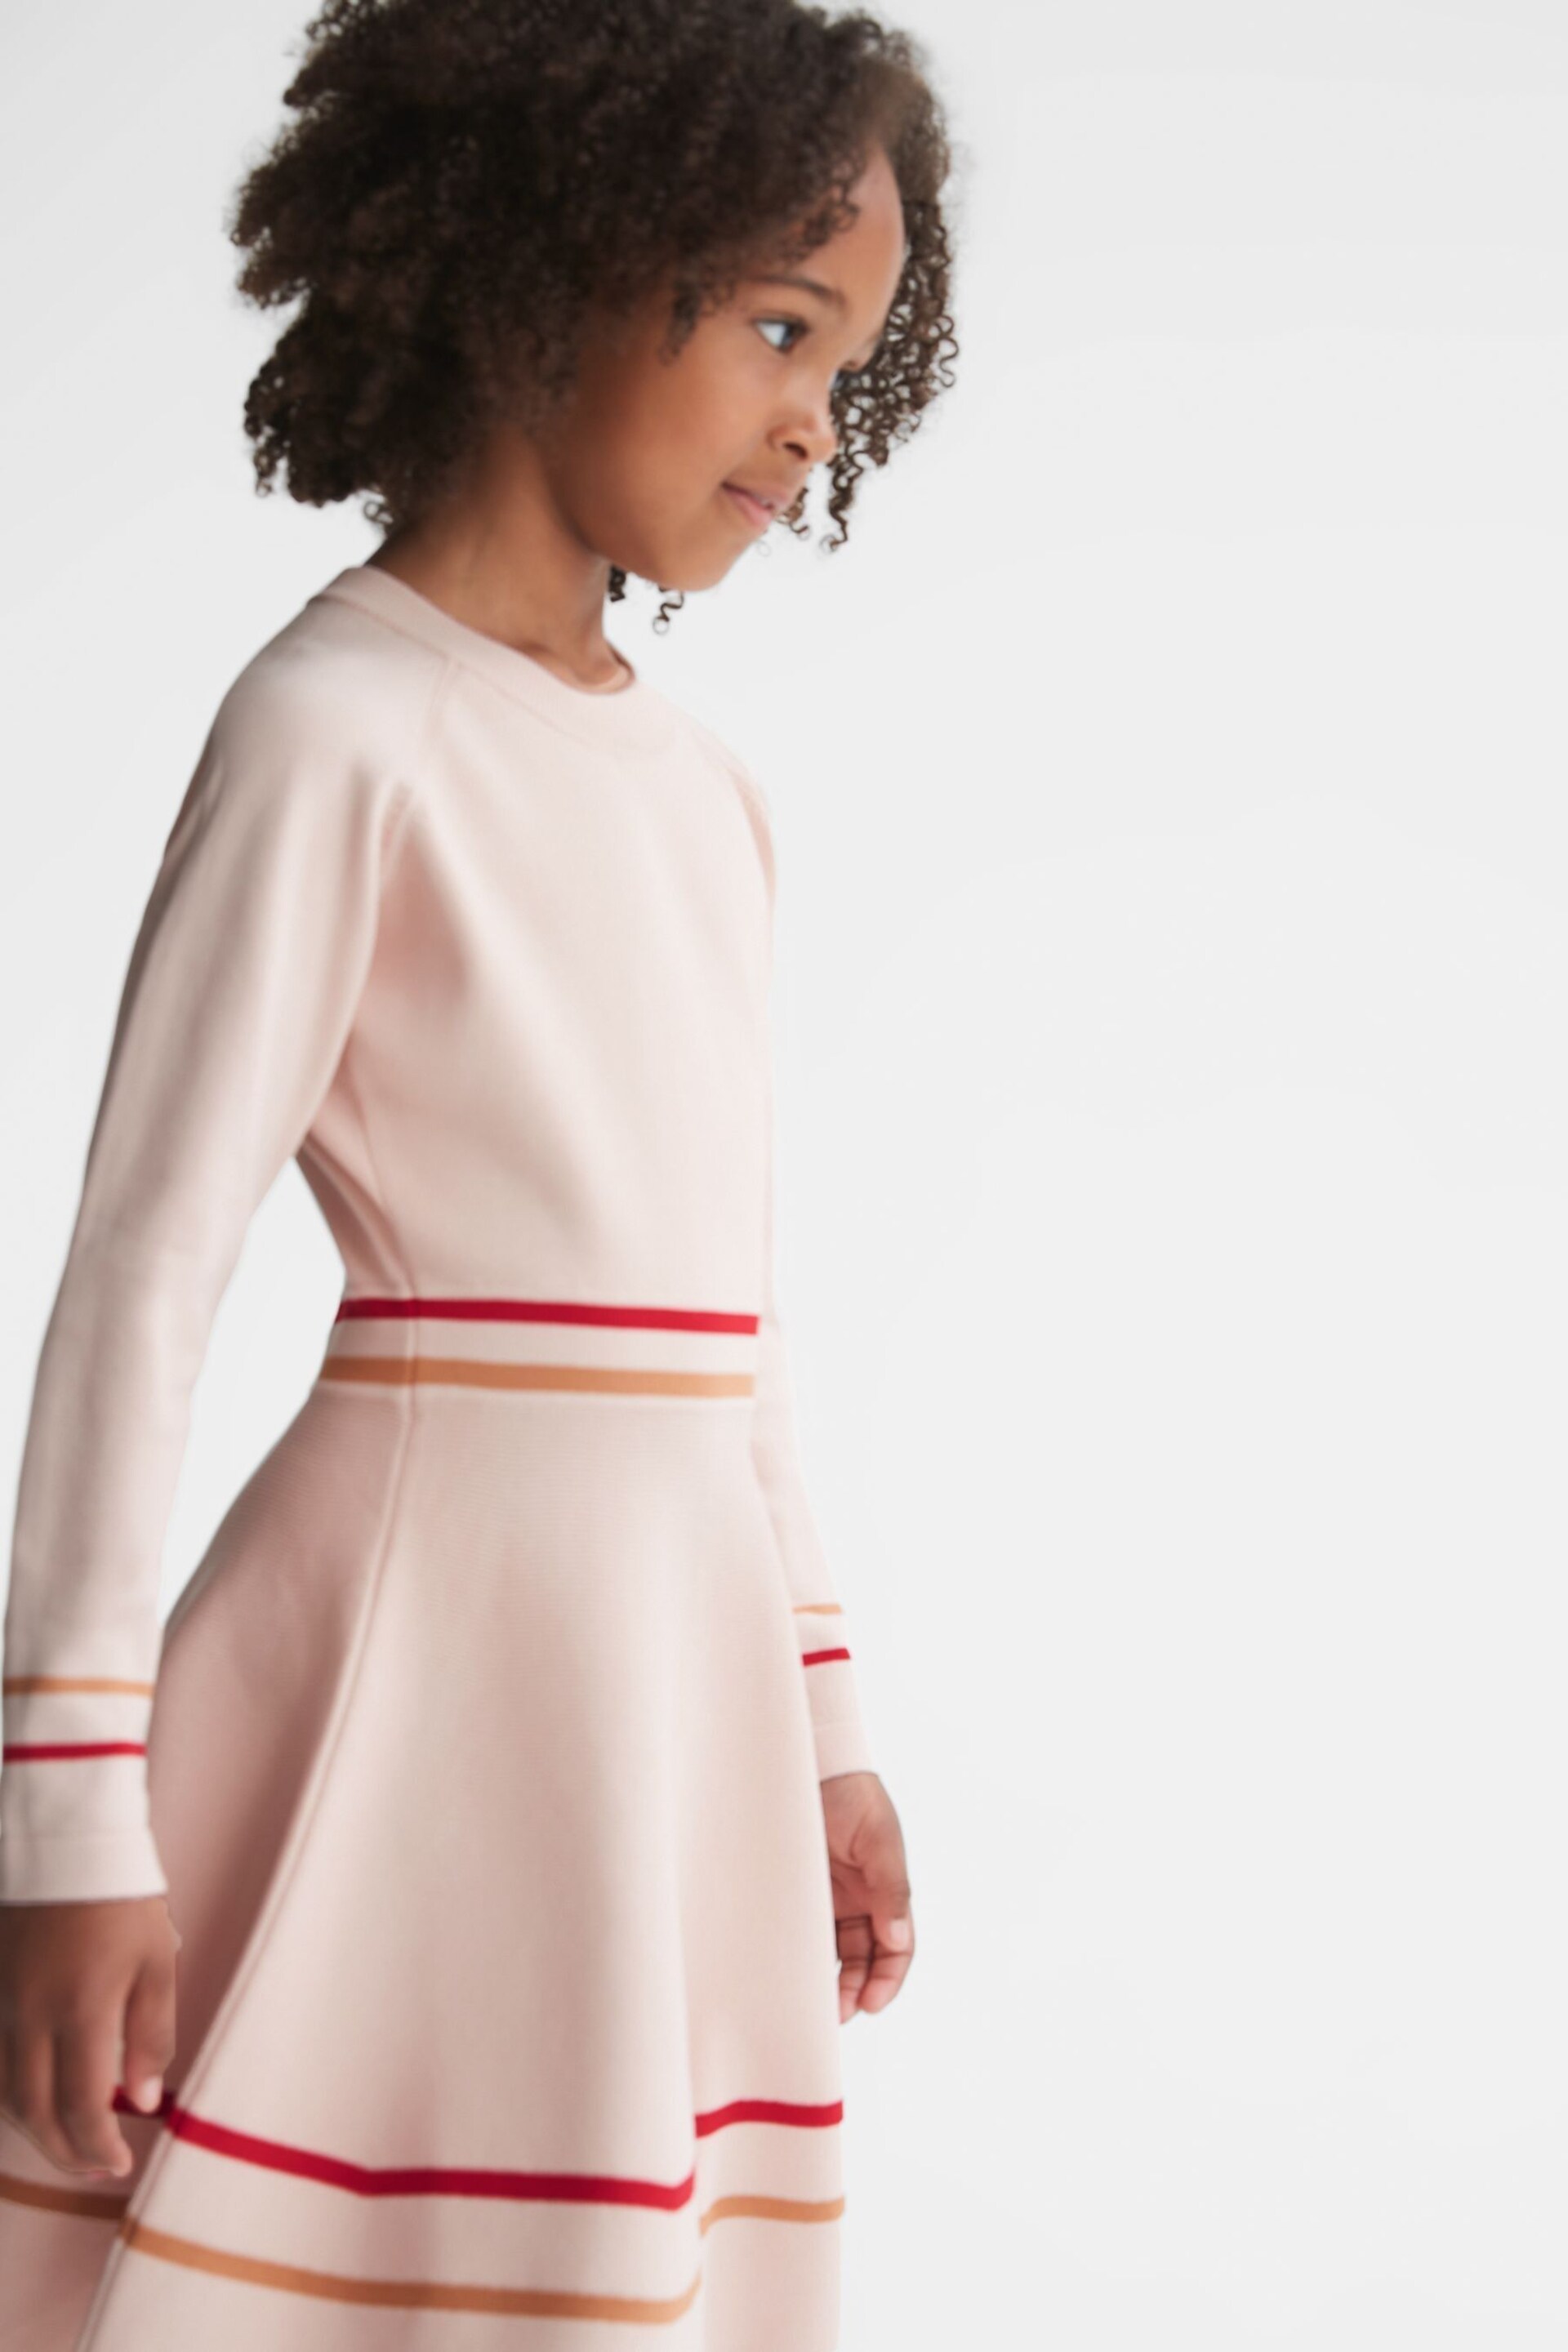 Reiss Pink Edith Junior Knitted Dress - Image 1 of 6